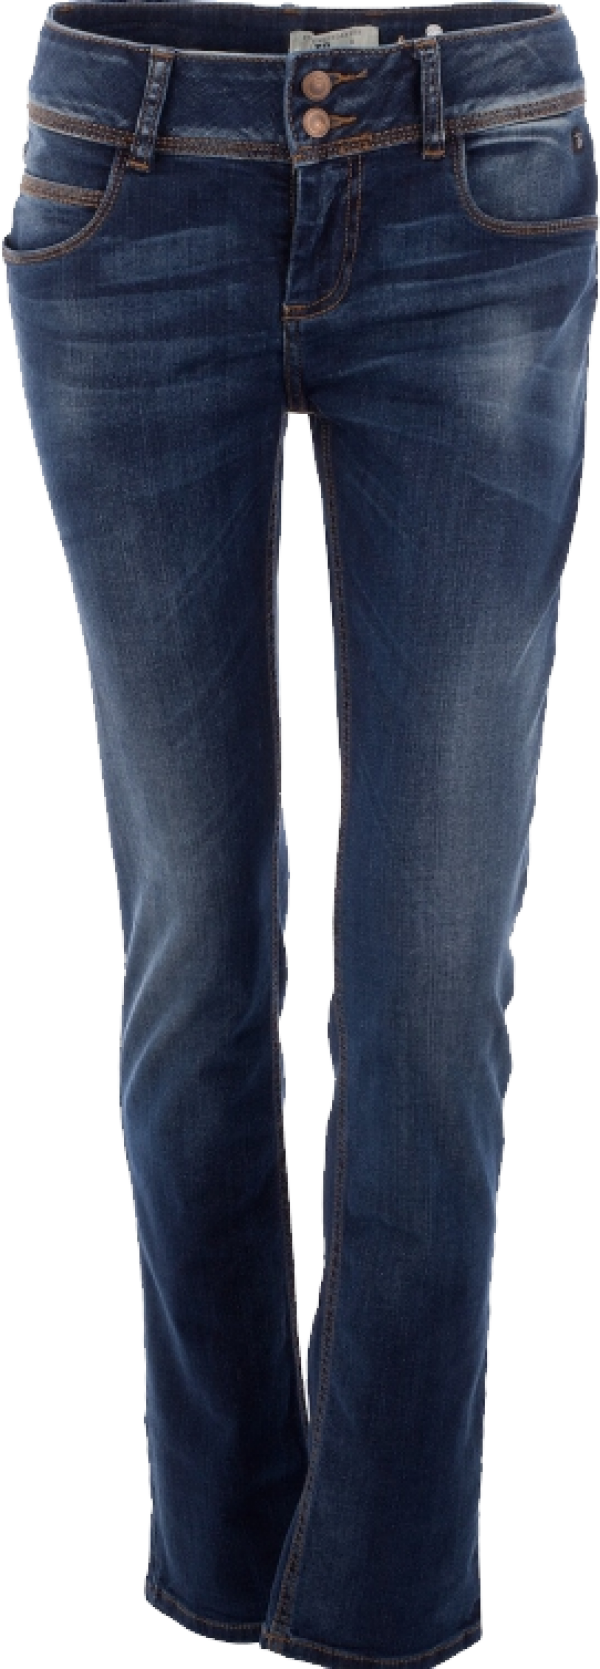 Classic Blue Jeans Standing PNG